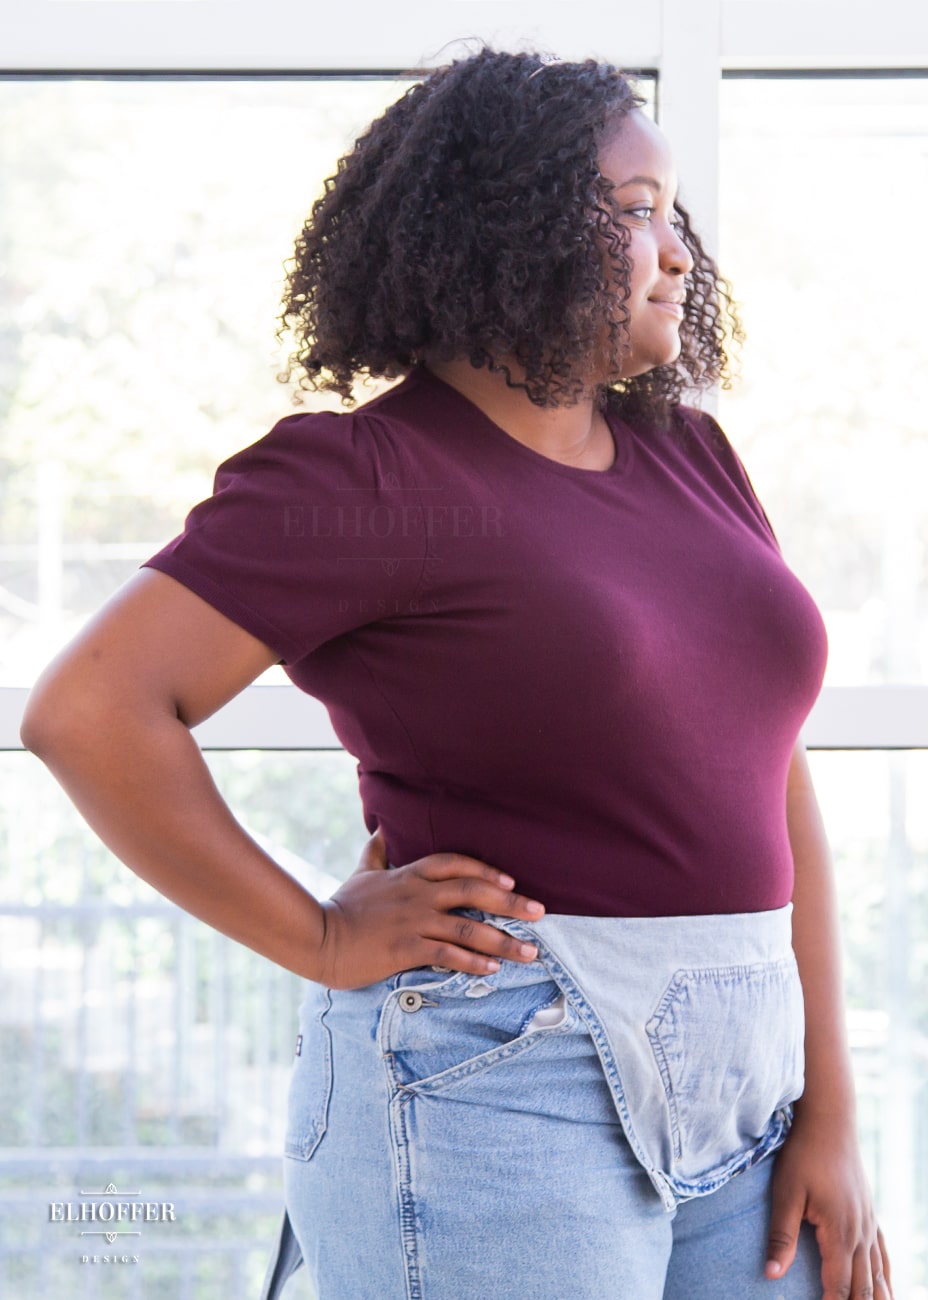 A side view of Maydelle, a medium dark skinned XL model with dark shoulder length tight curly hair, wearing a short sleeve light weight dark reddish purple knit top. The top hits about mid hip in length and the sleeves have pleated gathering at the shoulders.